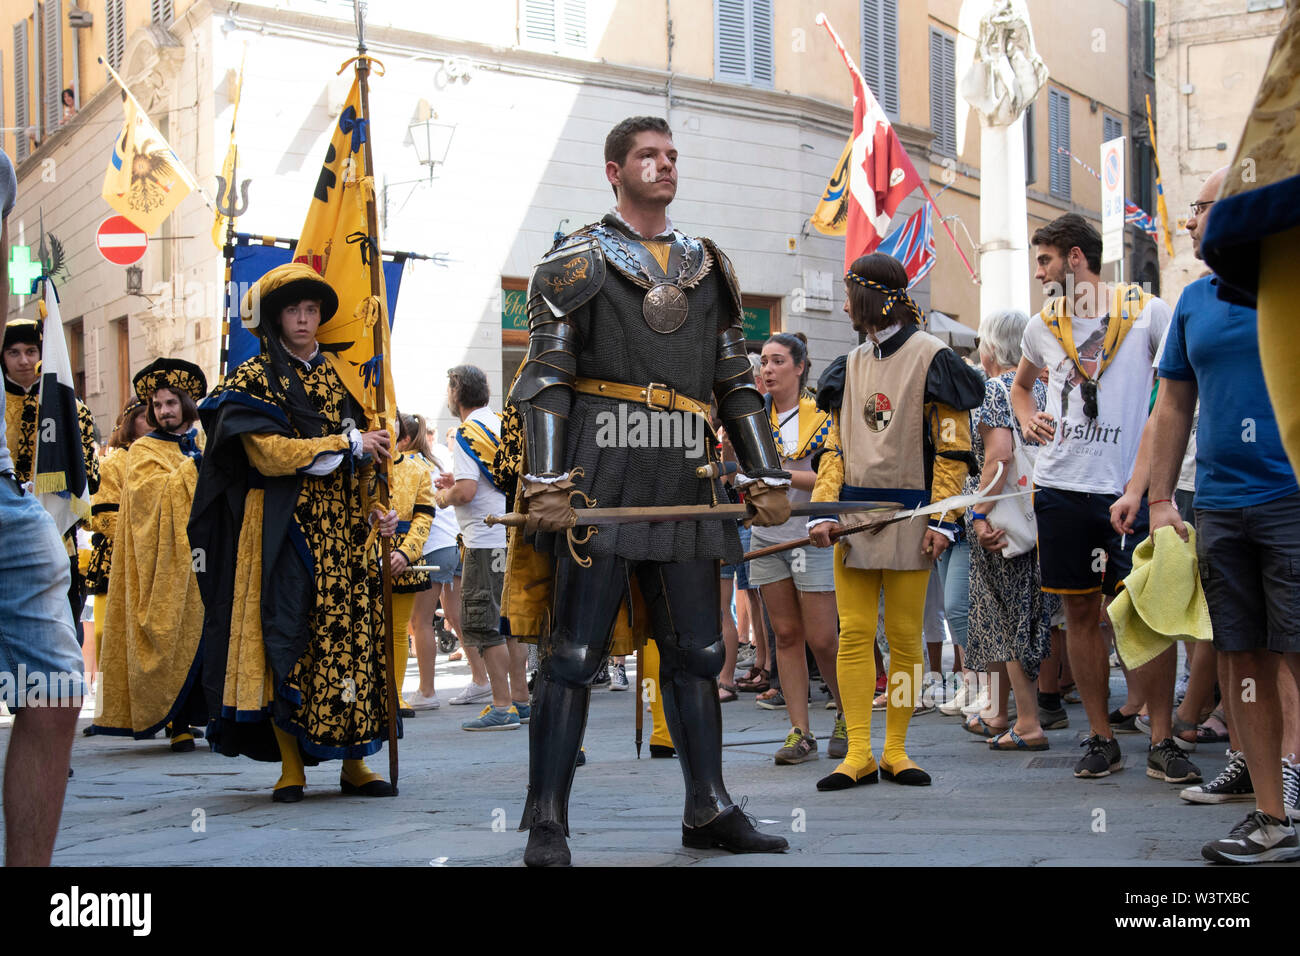 A handsome man dressed in historical medieval costume and garb marches in the historic Palio parade in Siena, Italy Stock Photo